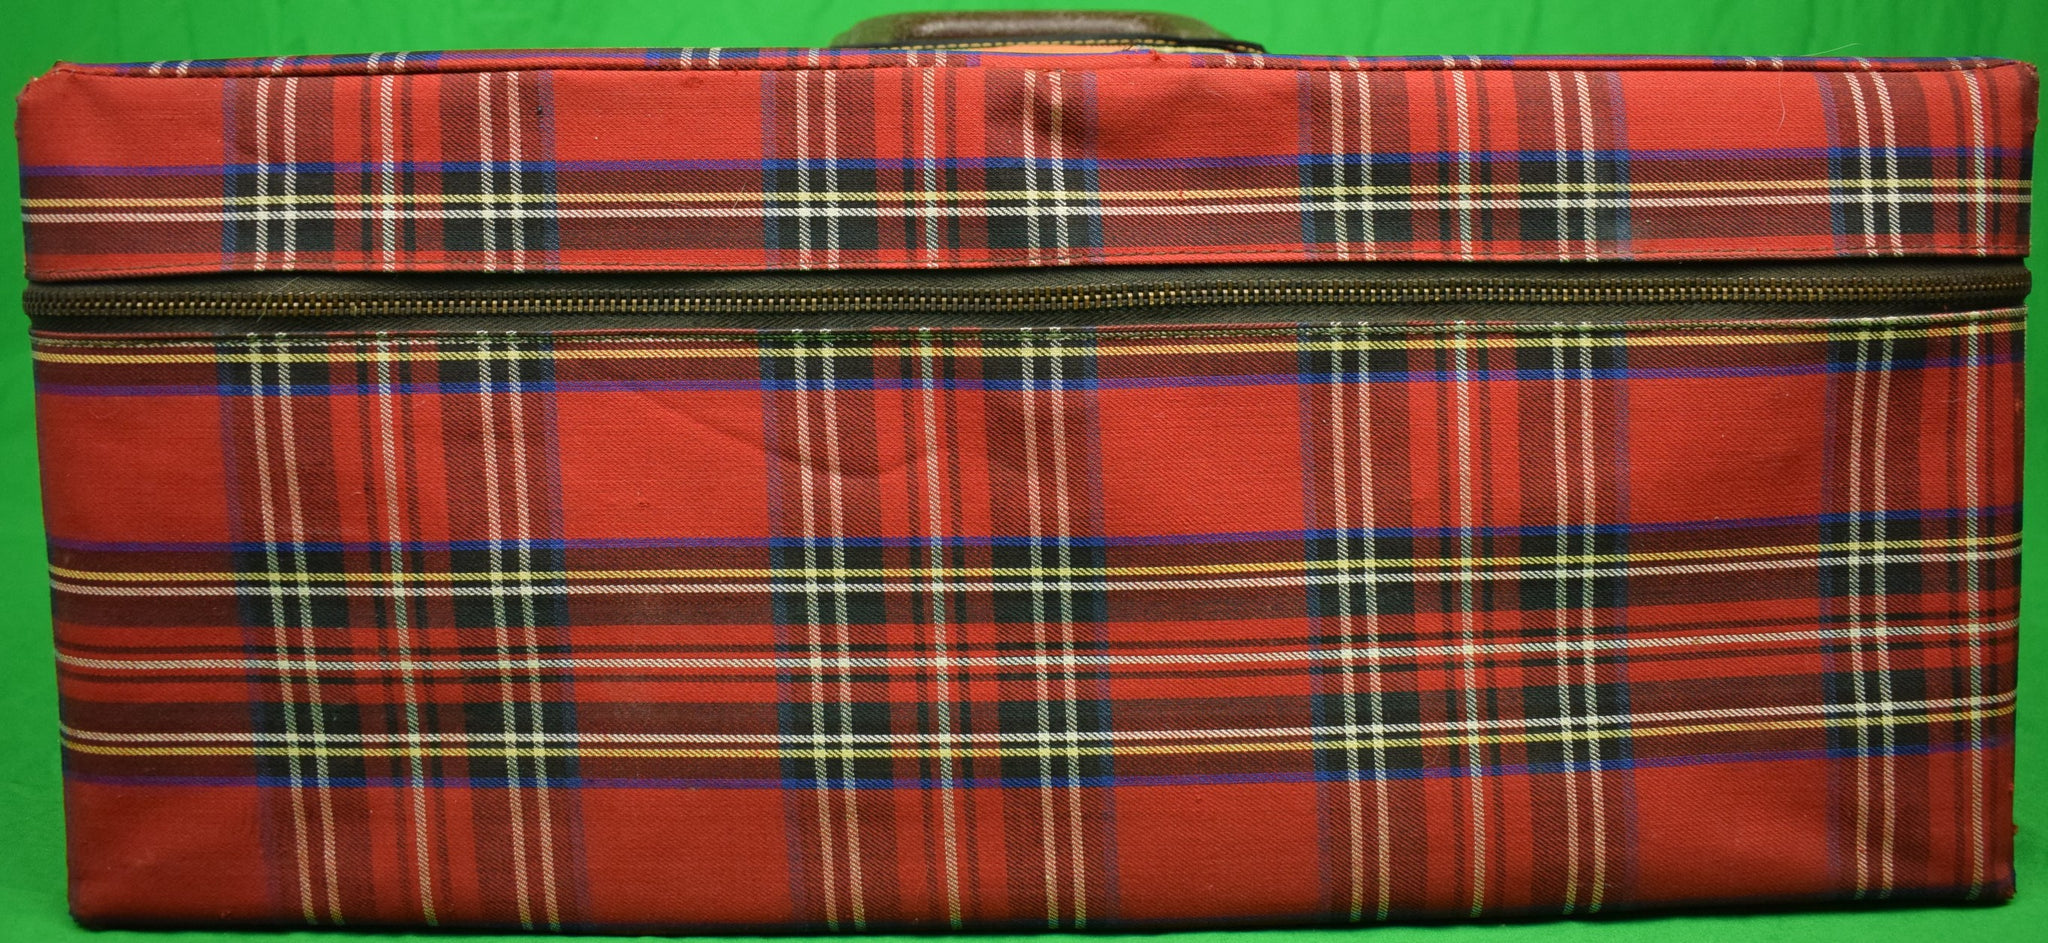 Abercrombie & Fitch De Luxe Mahogany Tackle Box w/ Royal Stewart Tartan  Plaid Cover